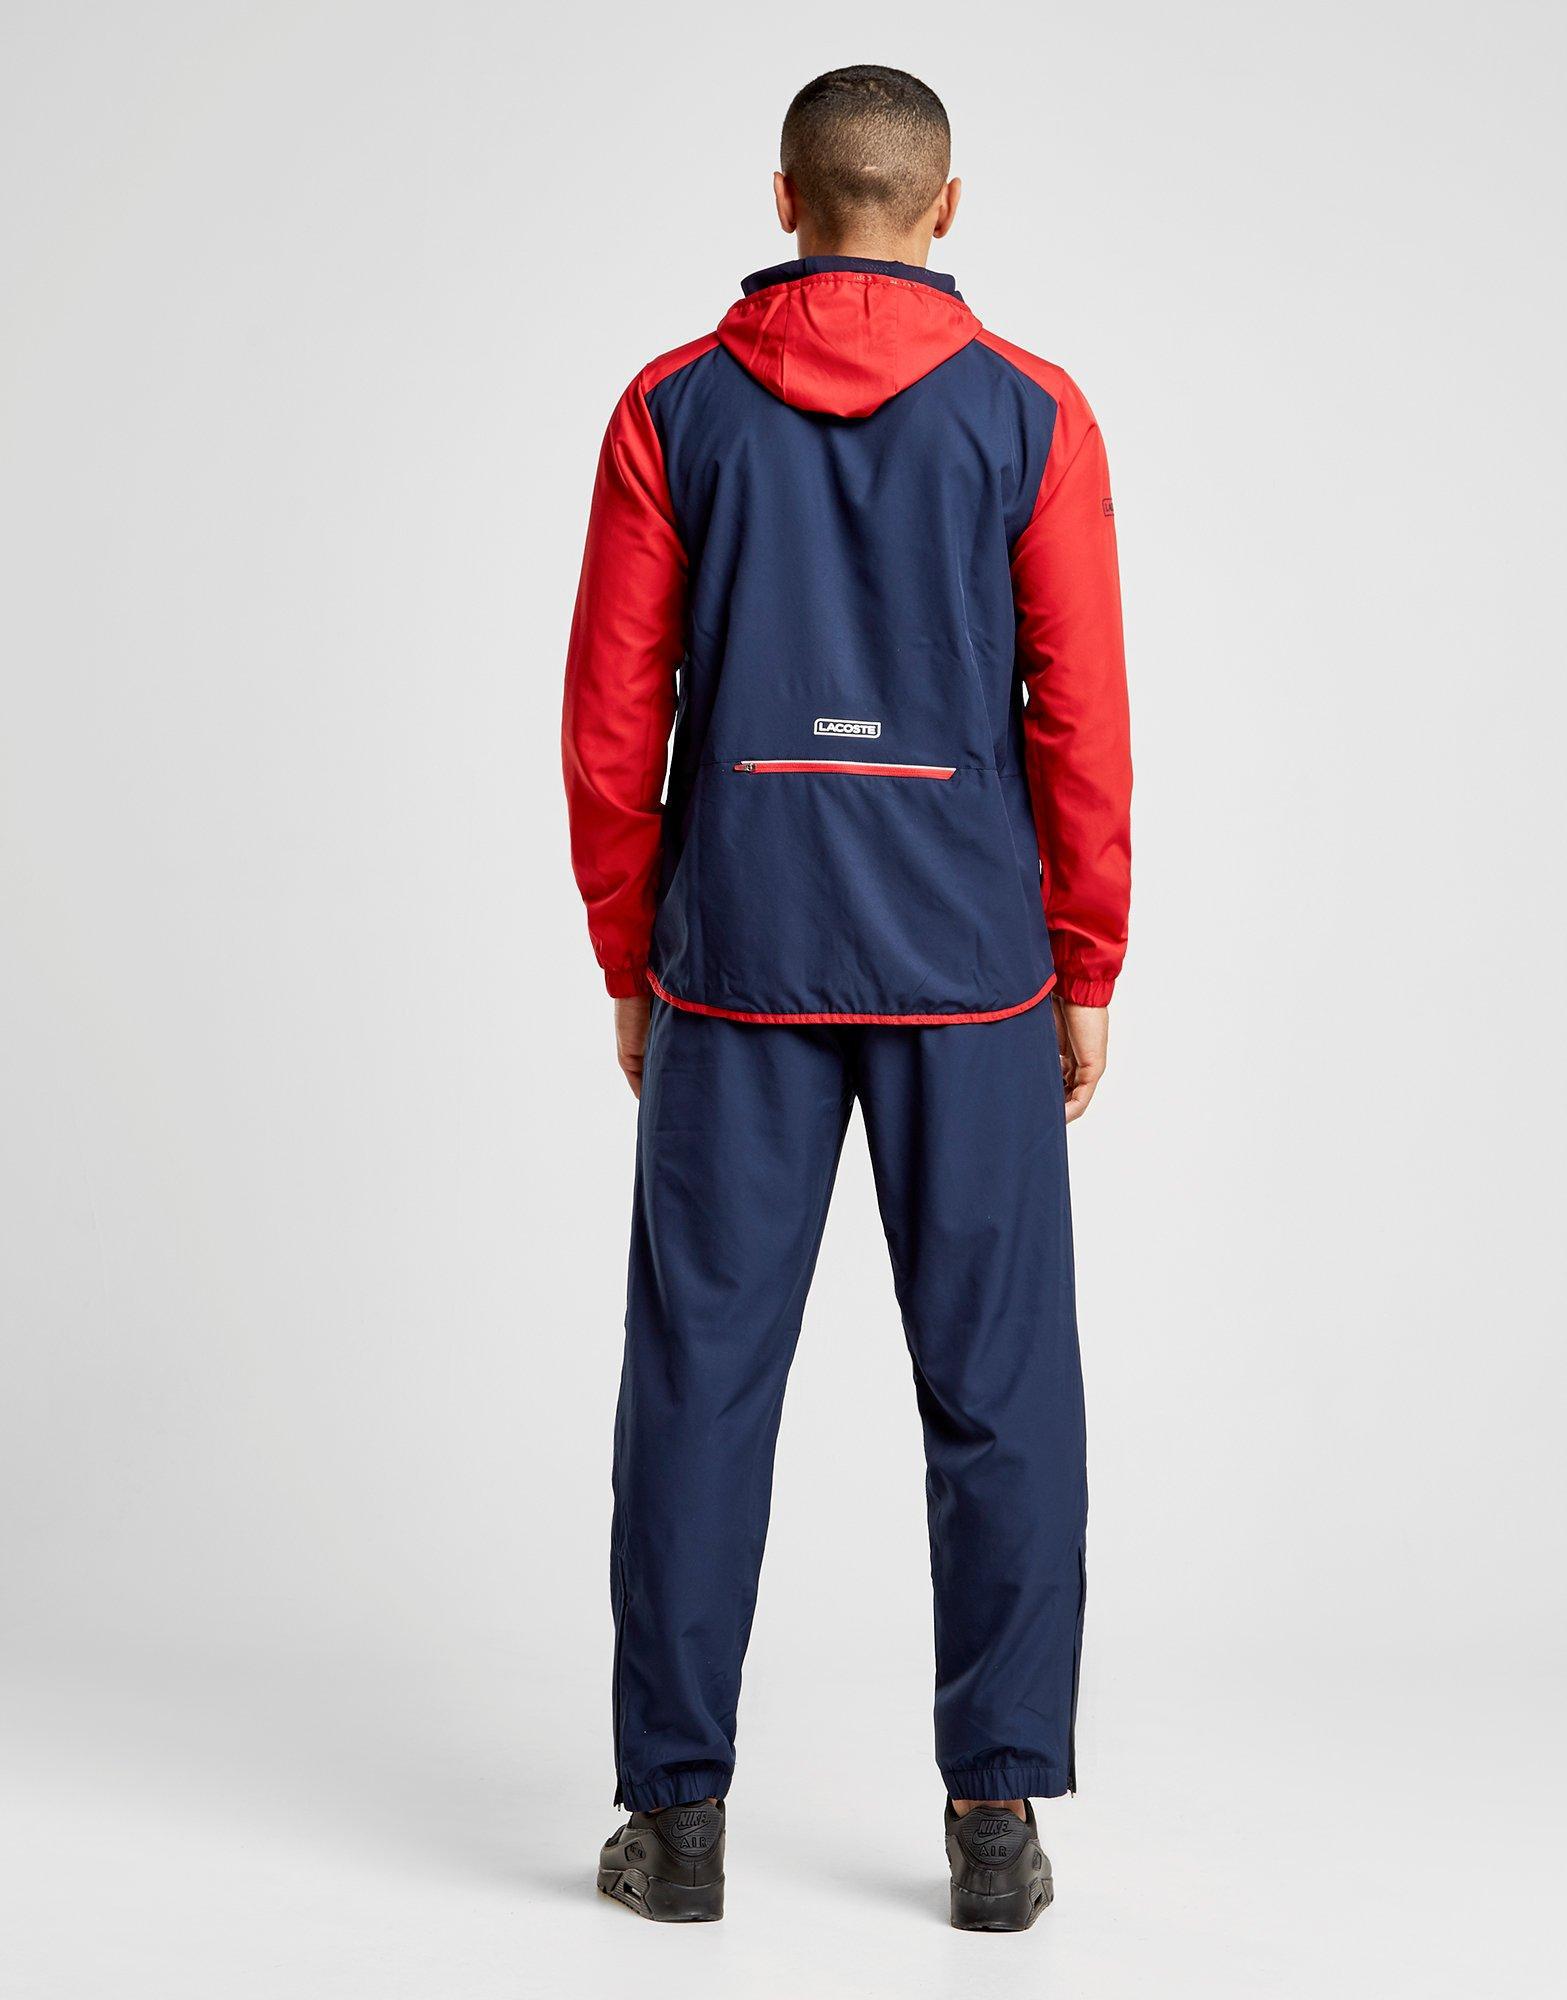 Lacoste Synthetic Side Panel Tracksuit 